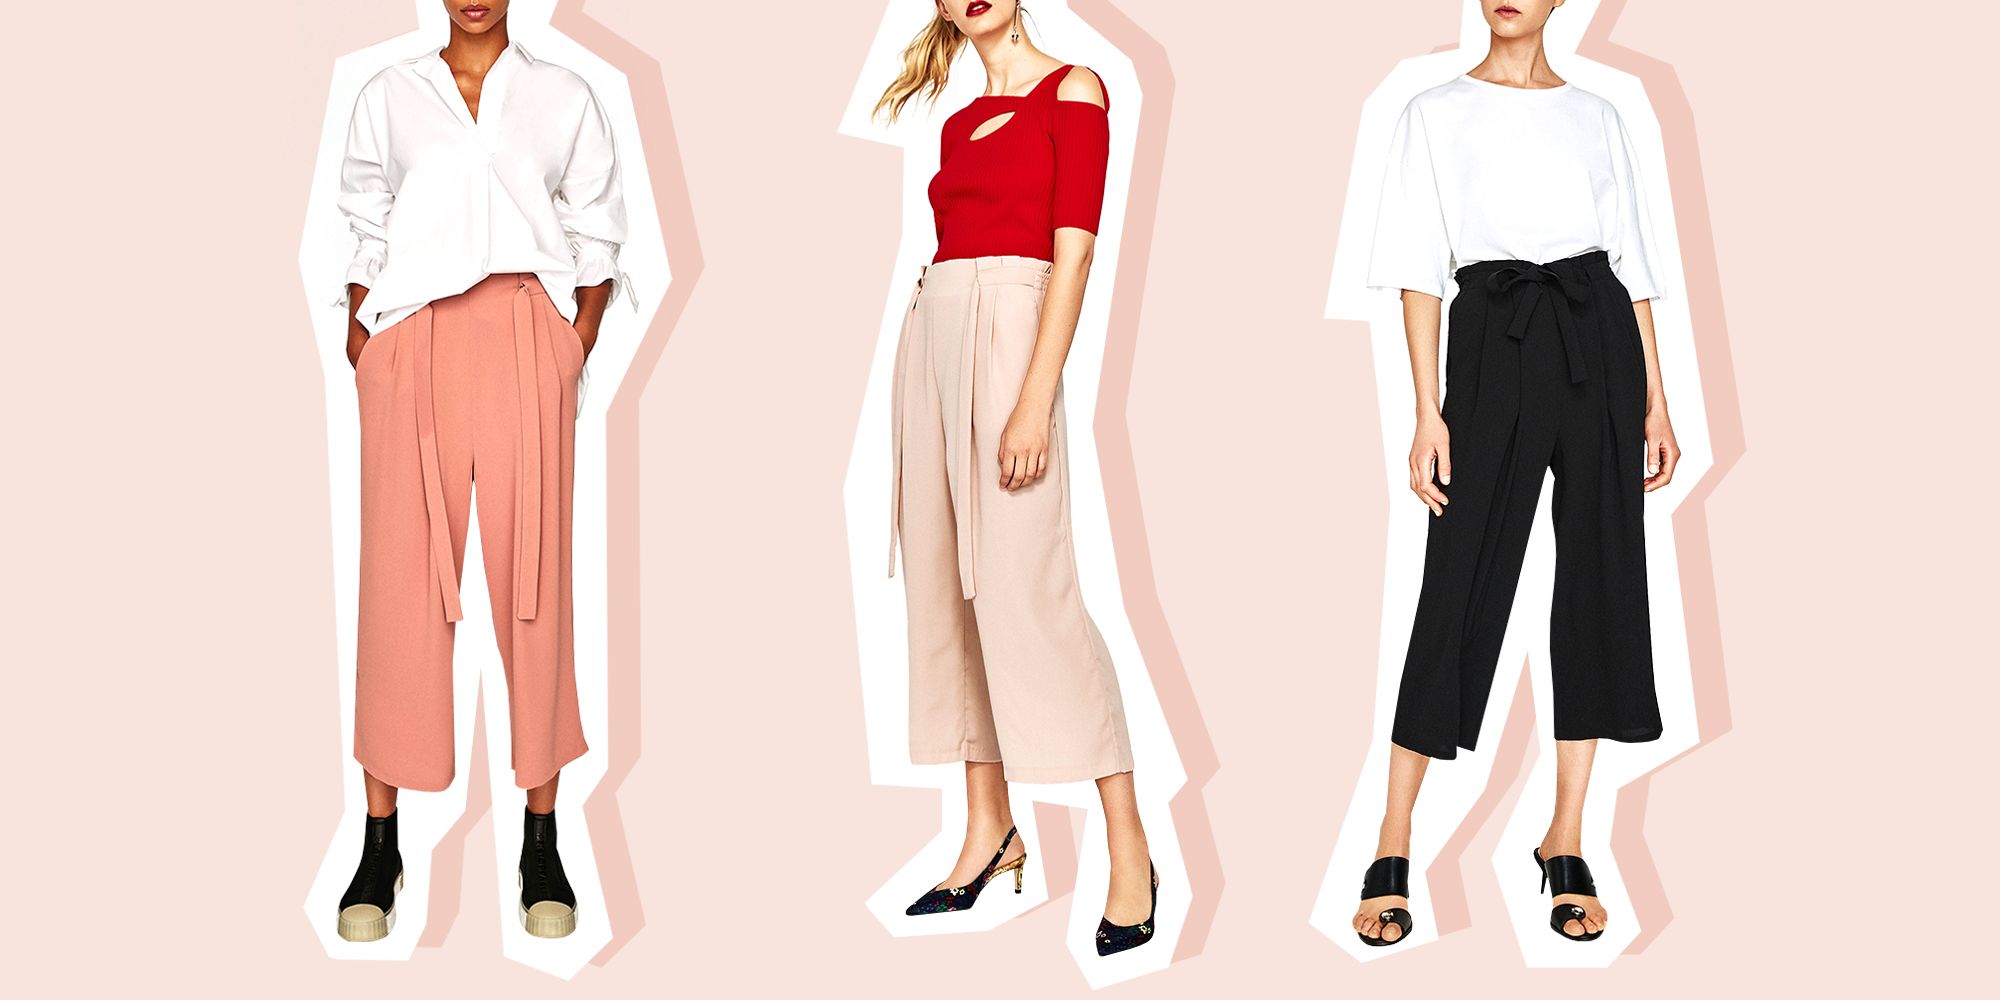 Go To Town Culotte Pants